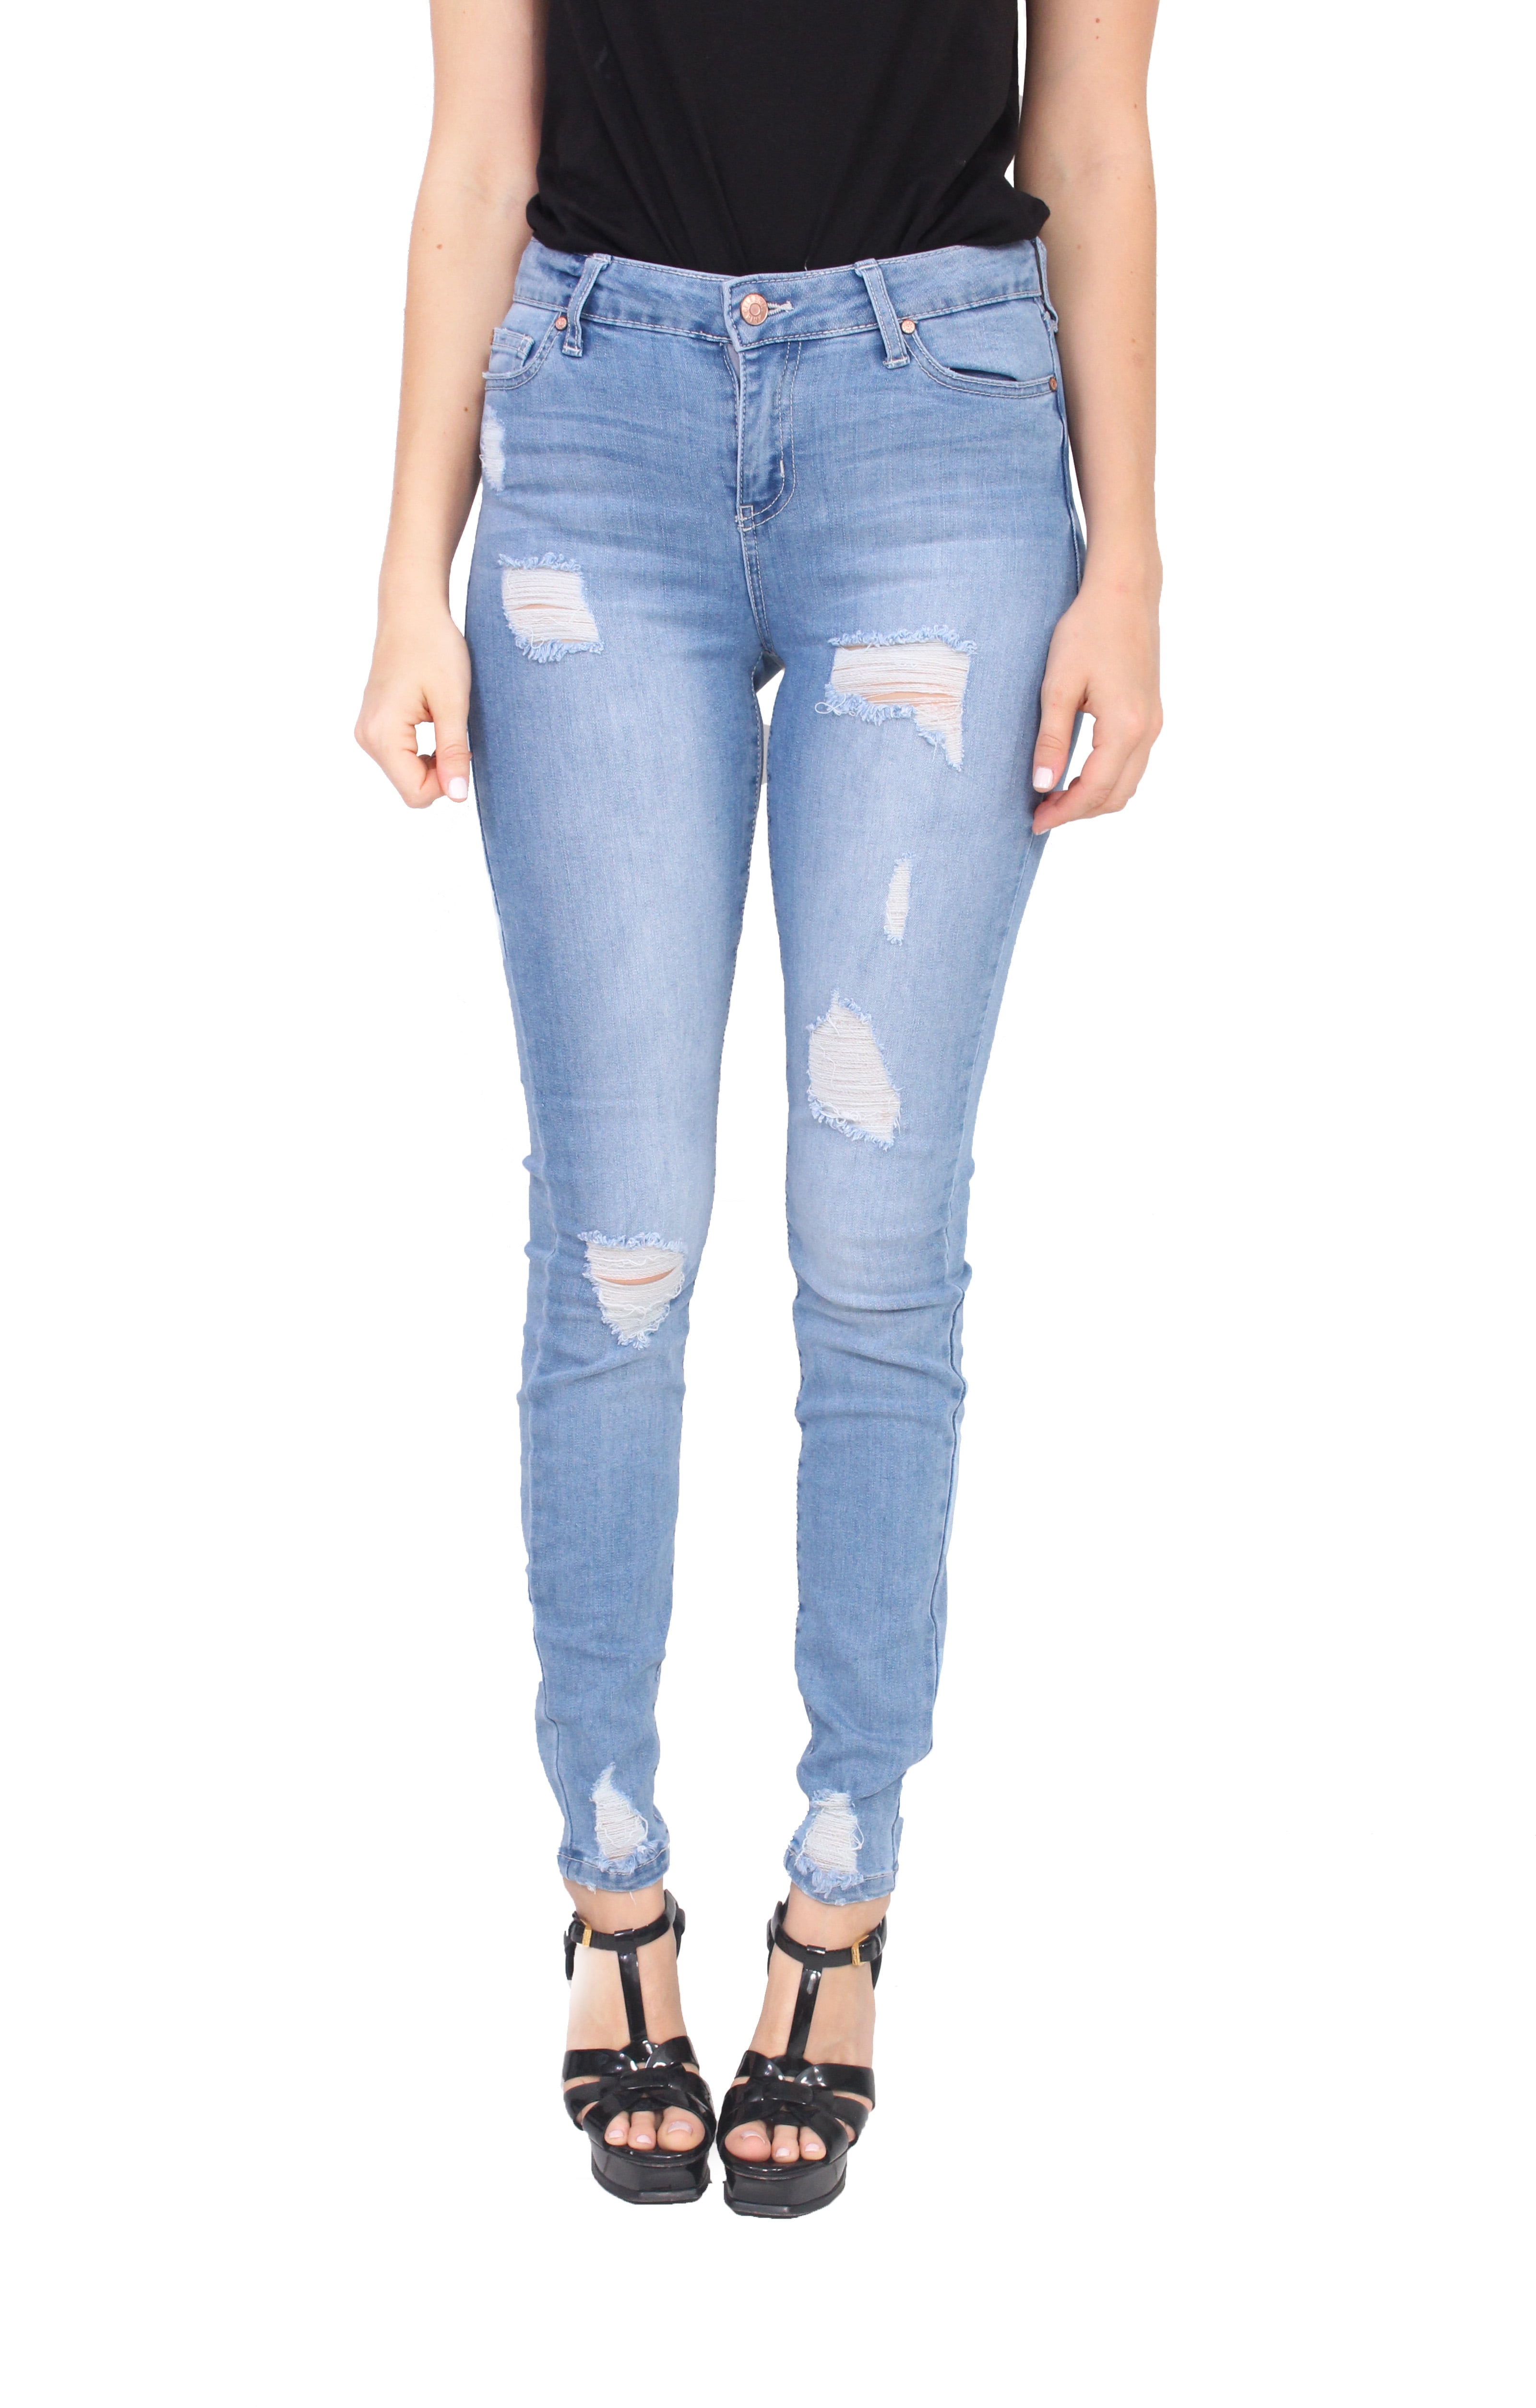 Celebrity Pink Jeans - Celebrity Pink Jeans Women Mid Rise Distressed ...